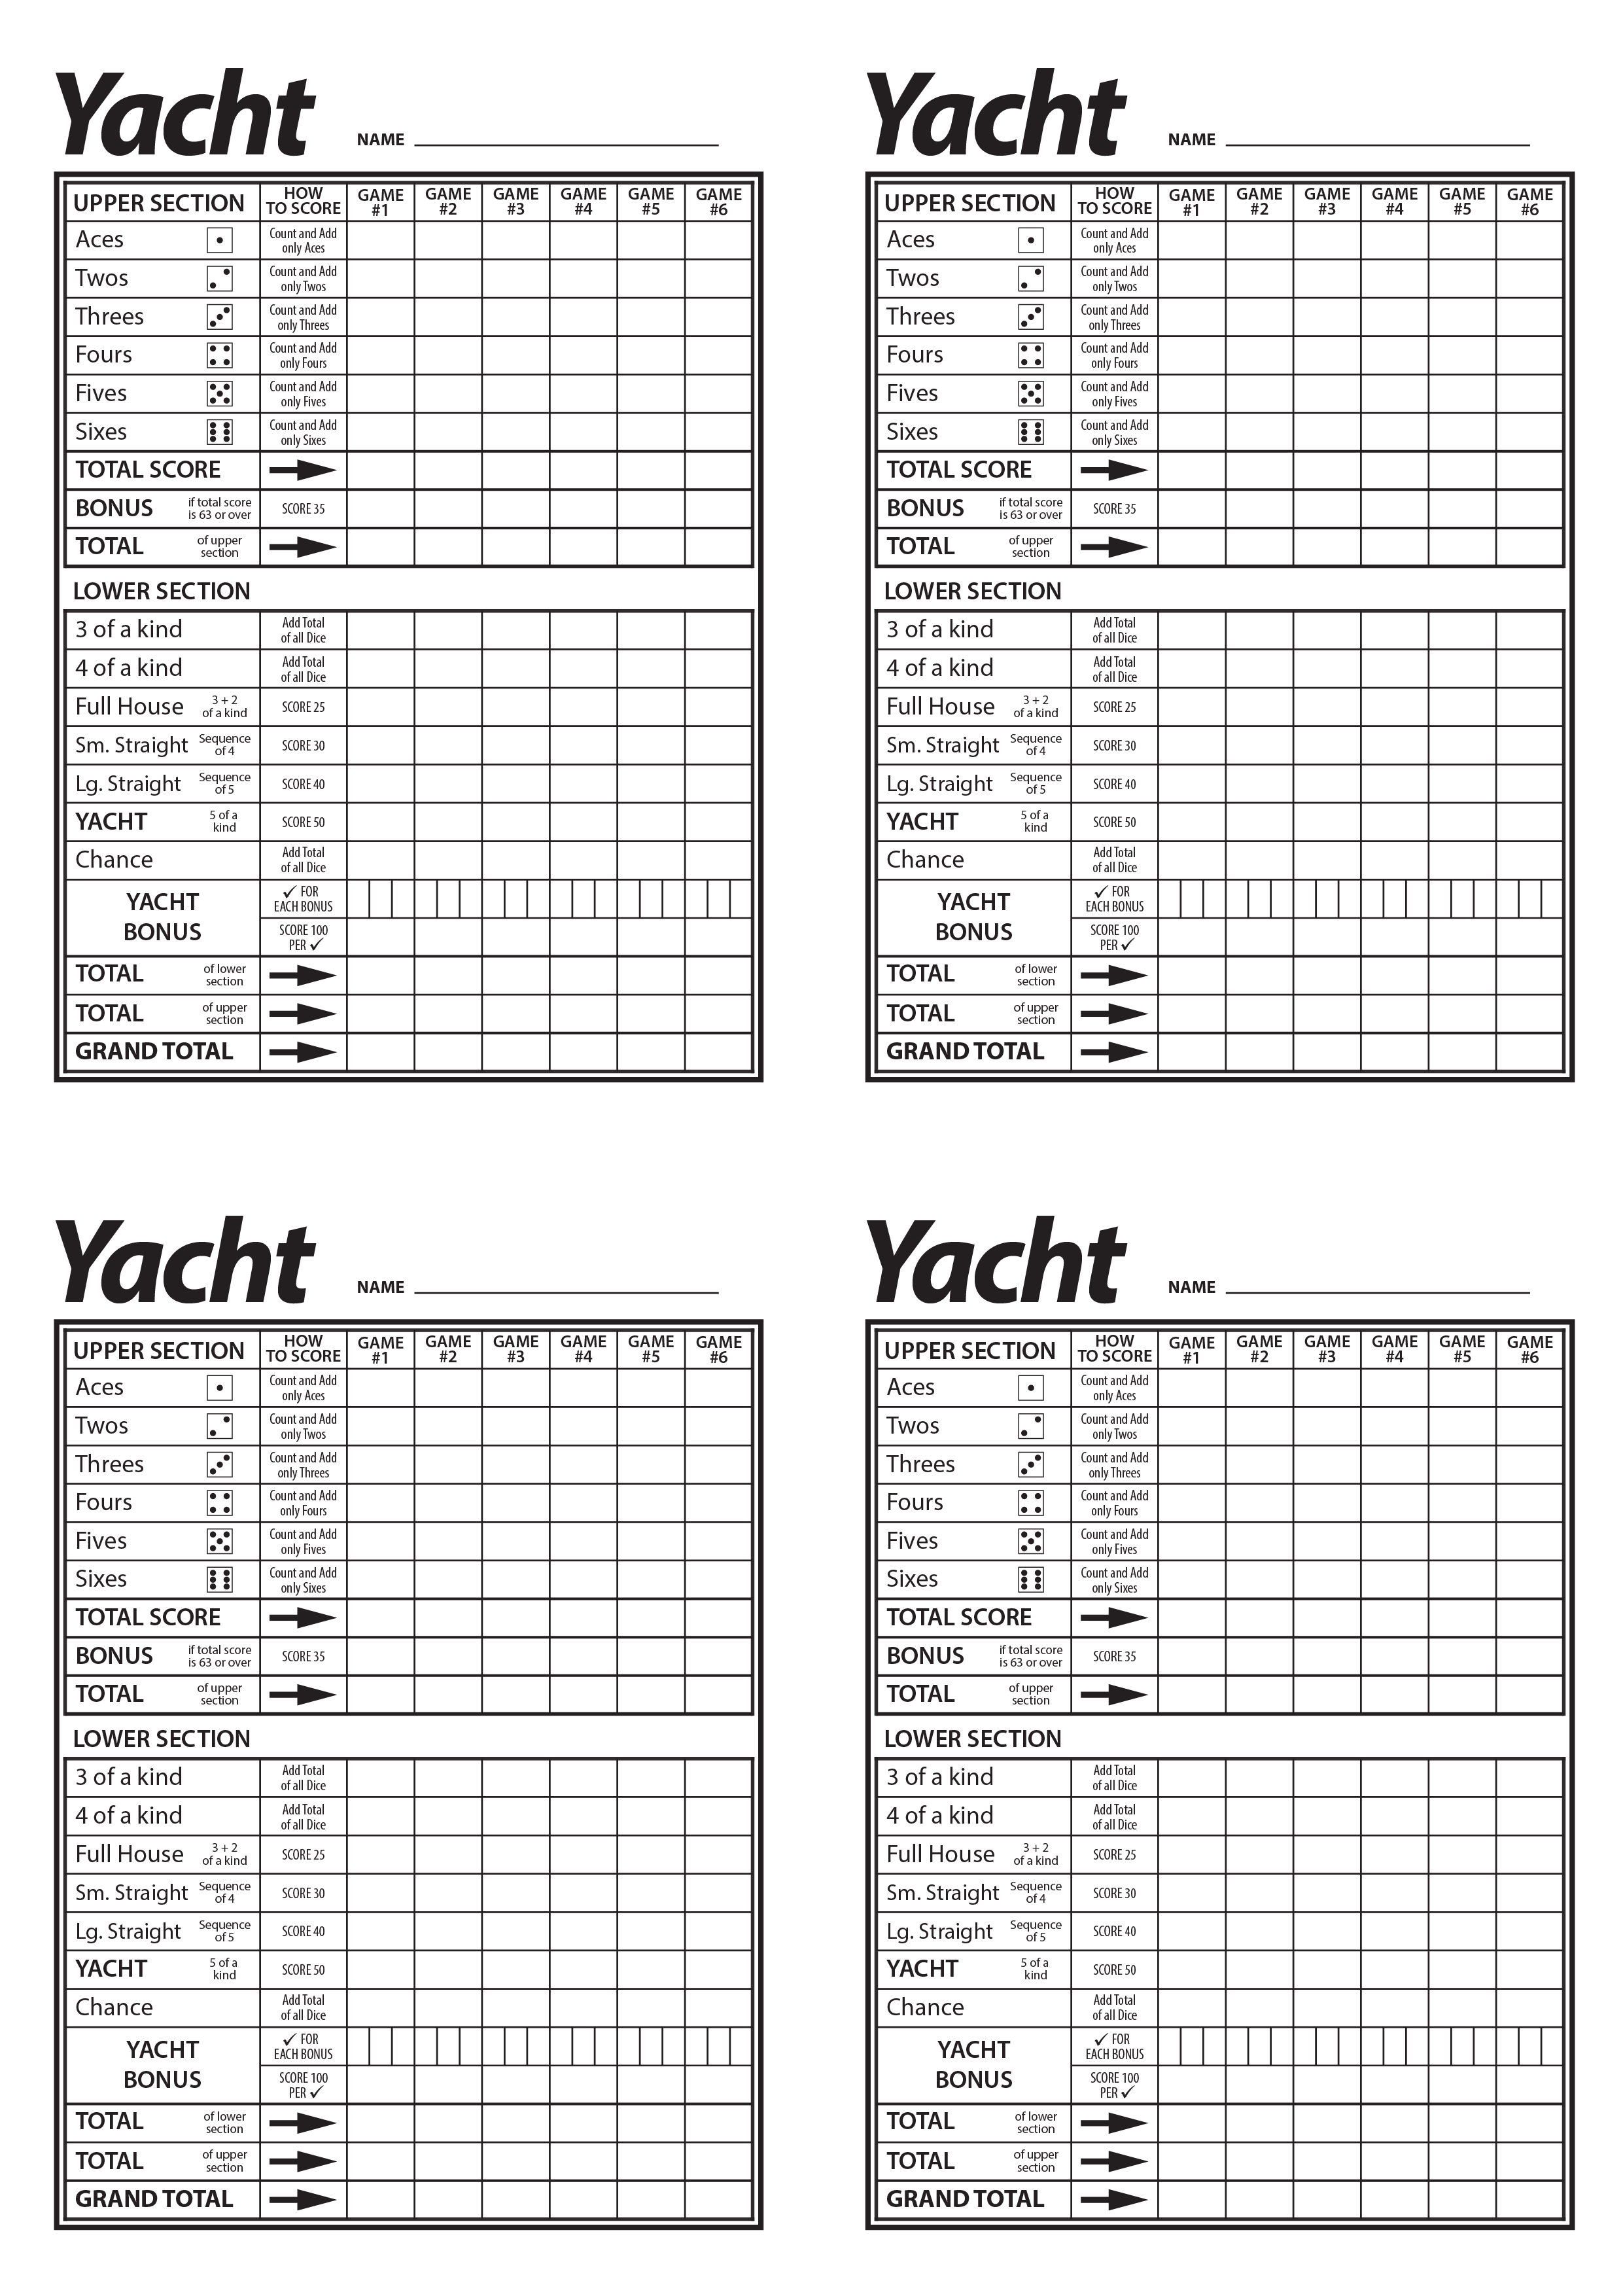 yacht dice game rules